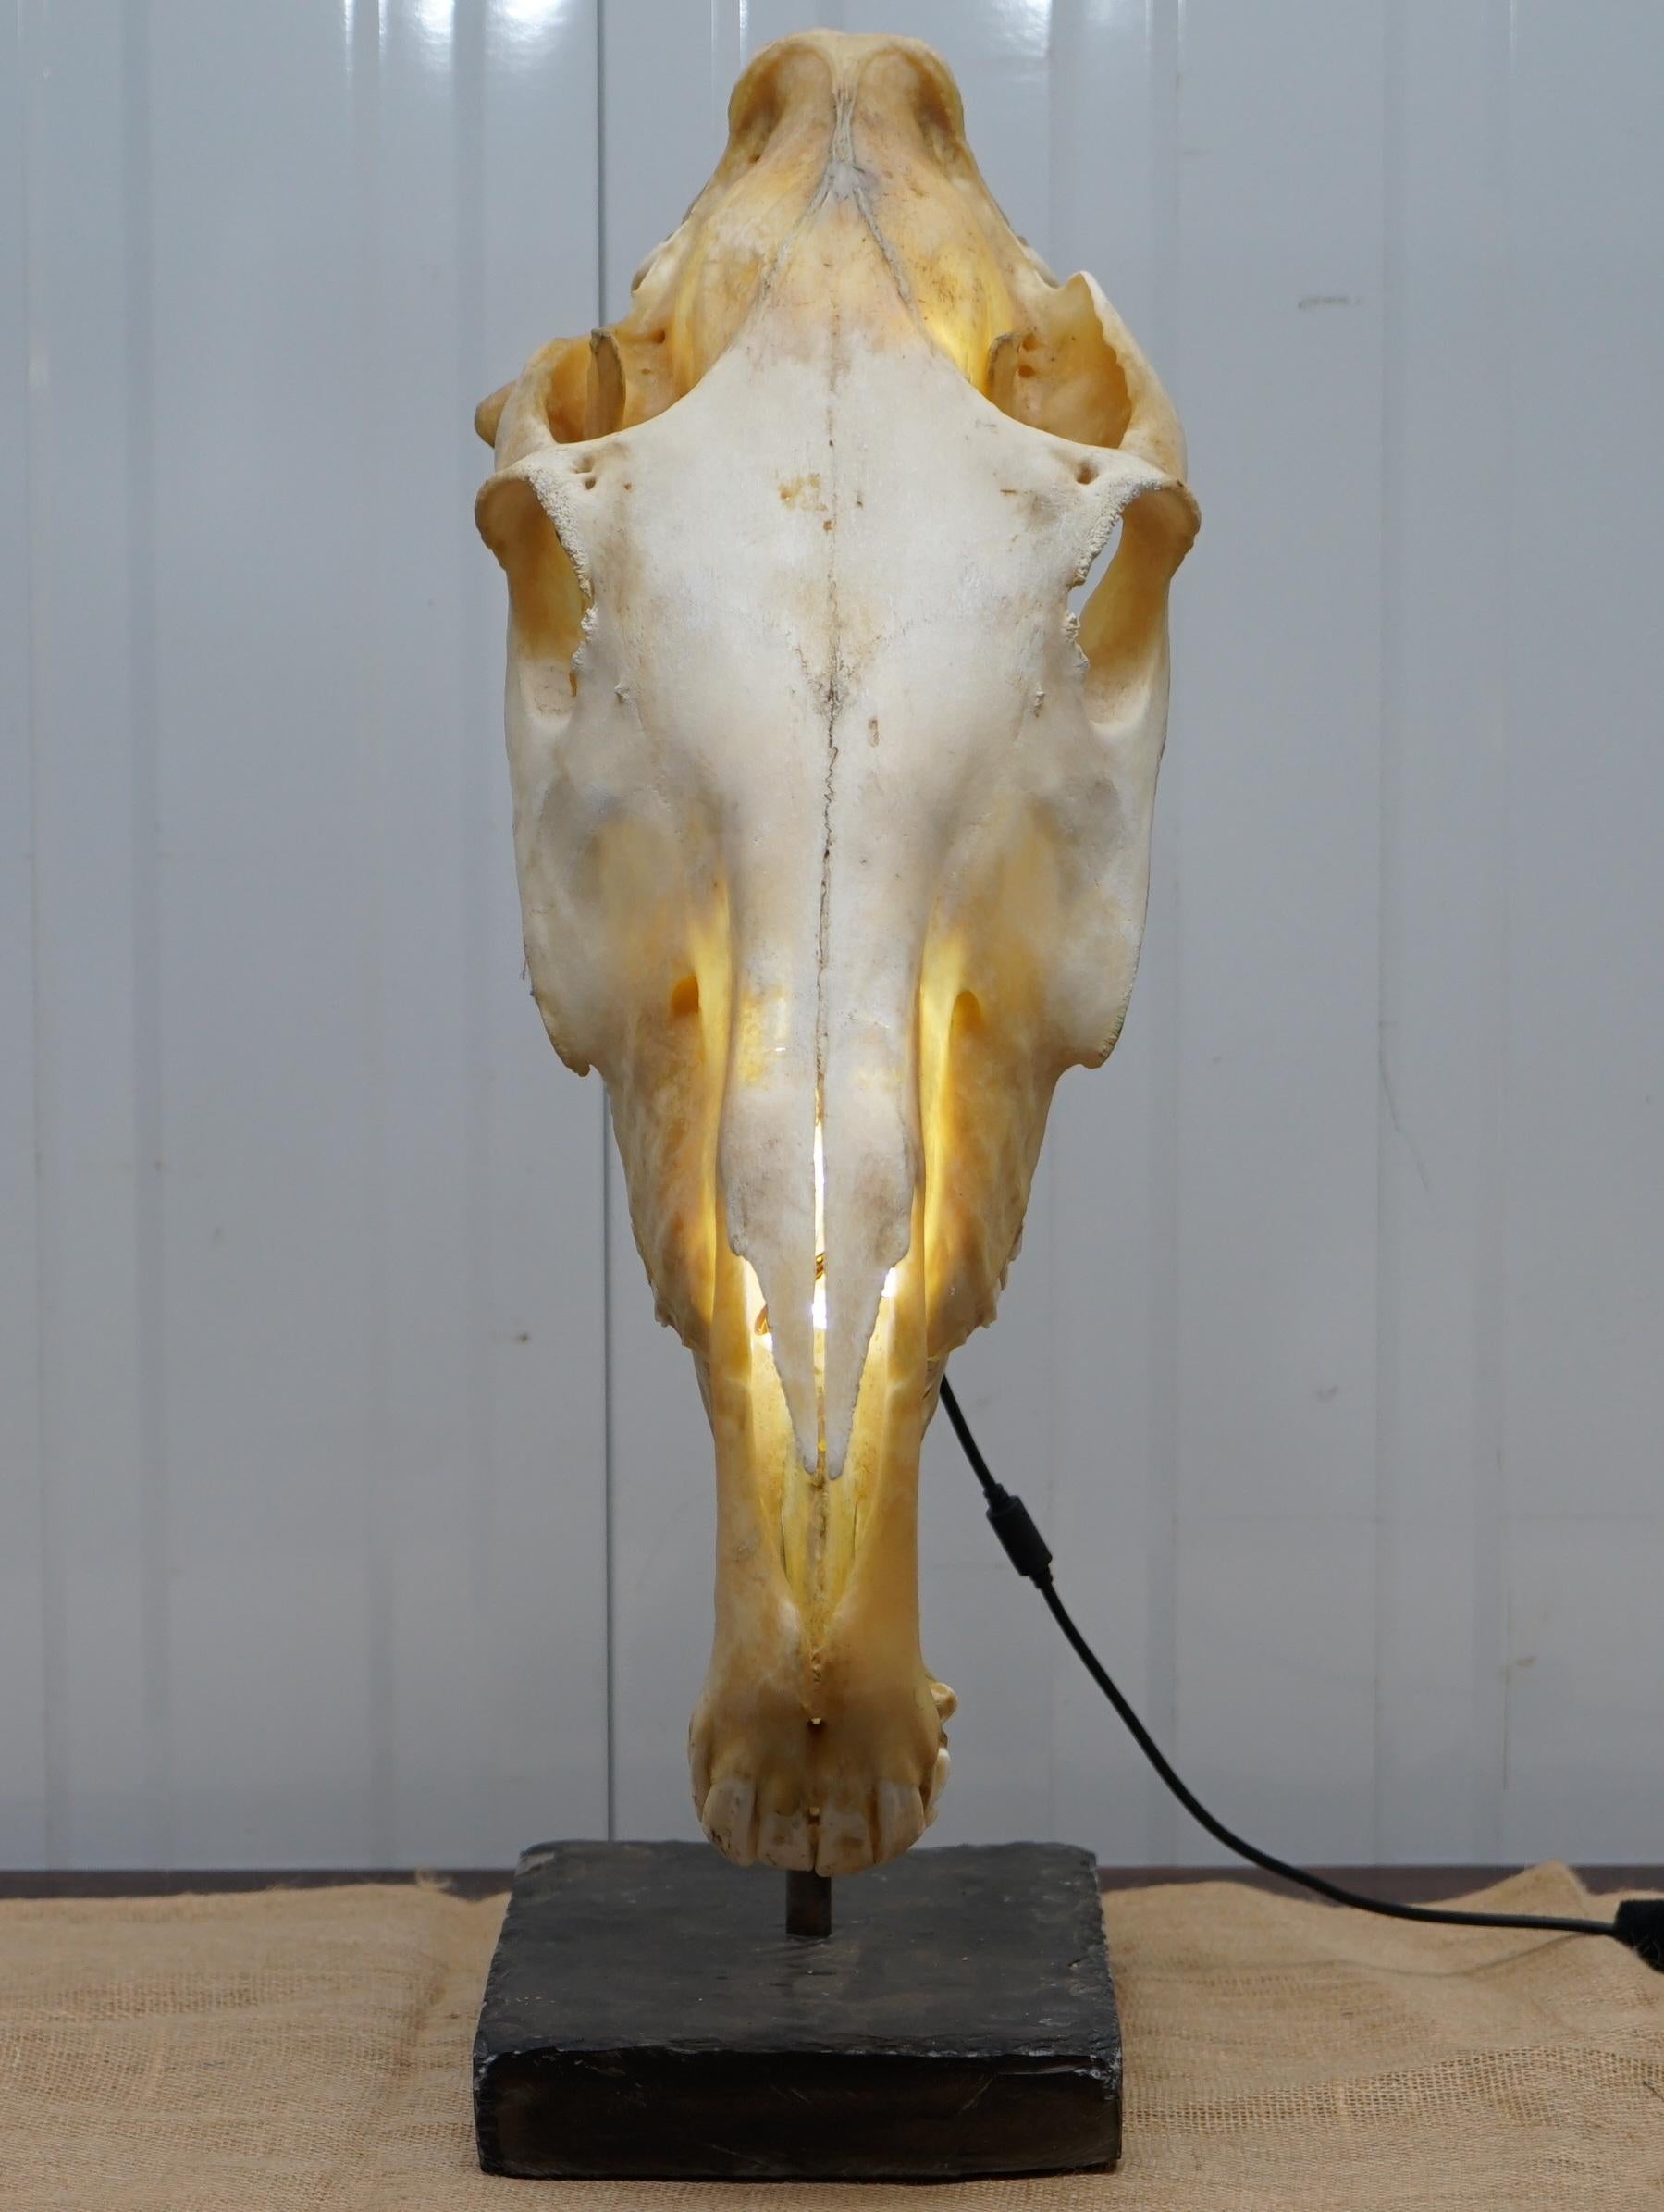 We are delighted to offer for sale this very rare one of a kind Horse skull lamp on a large heavy slate base

A very original and quite interesting conversation piece, you could be mistaken for thinking it was a dinosaur skull, my son certainly